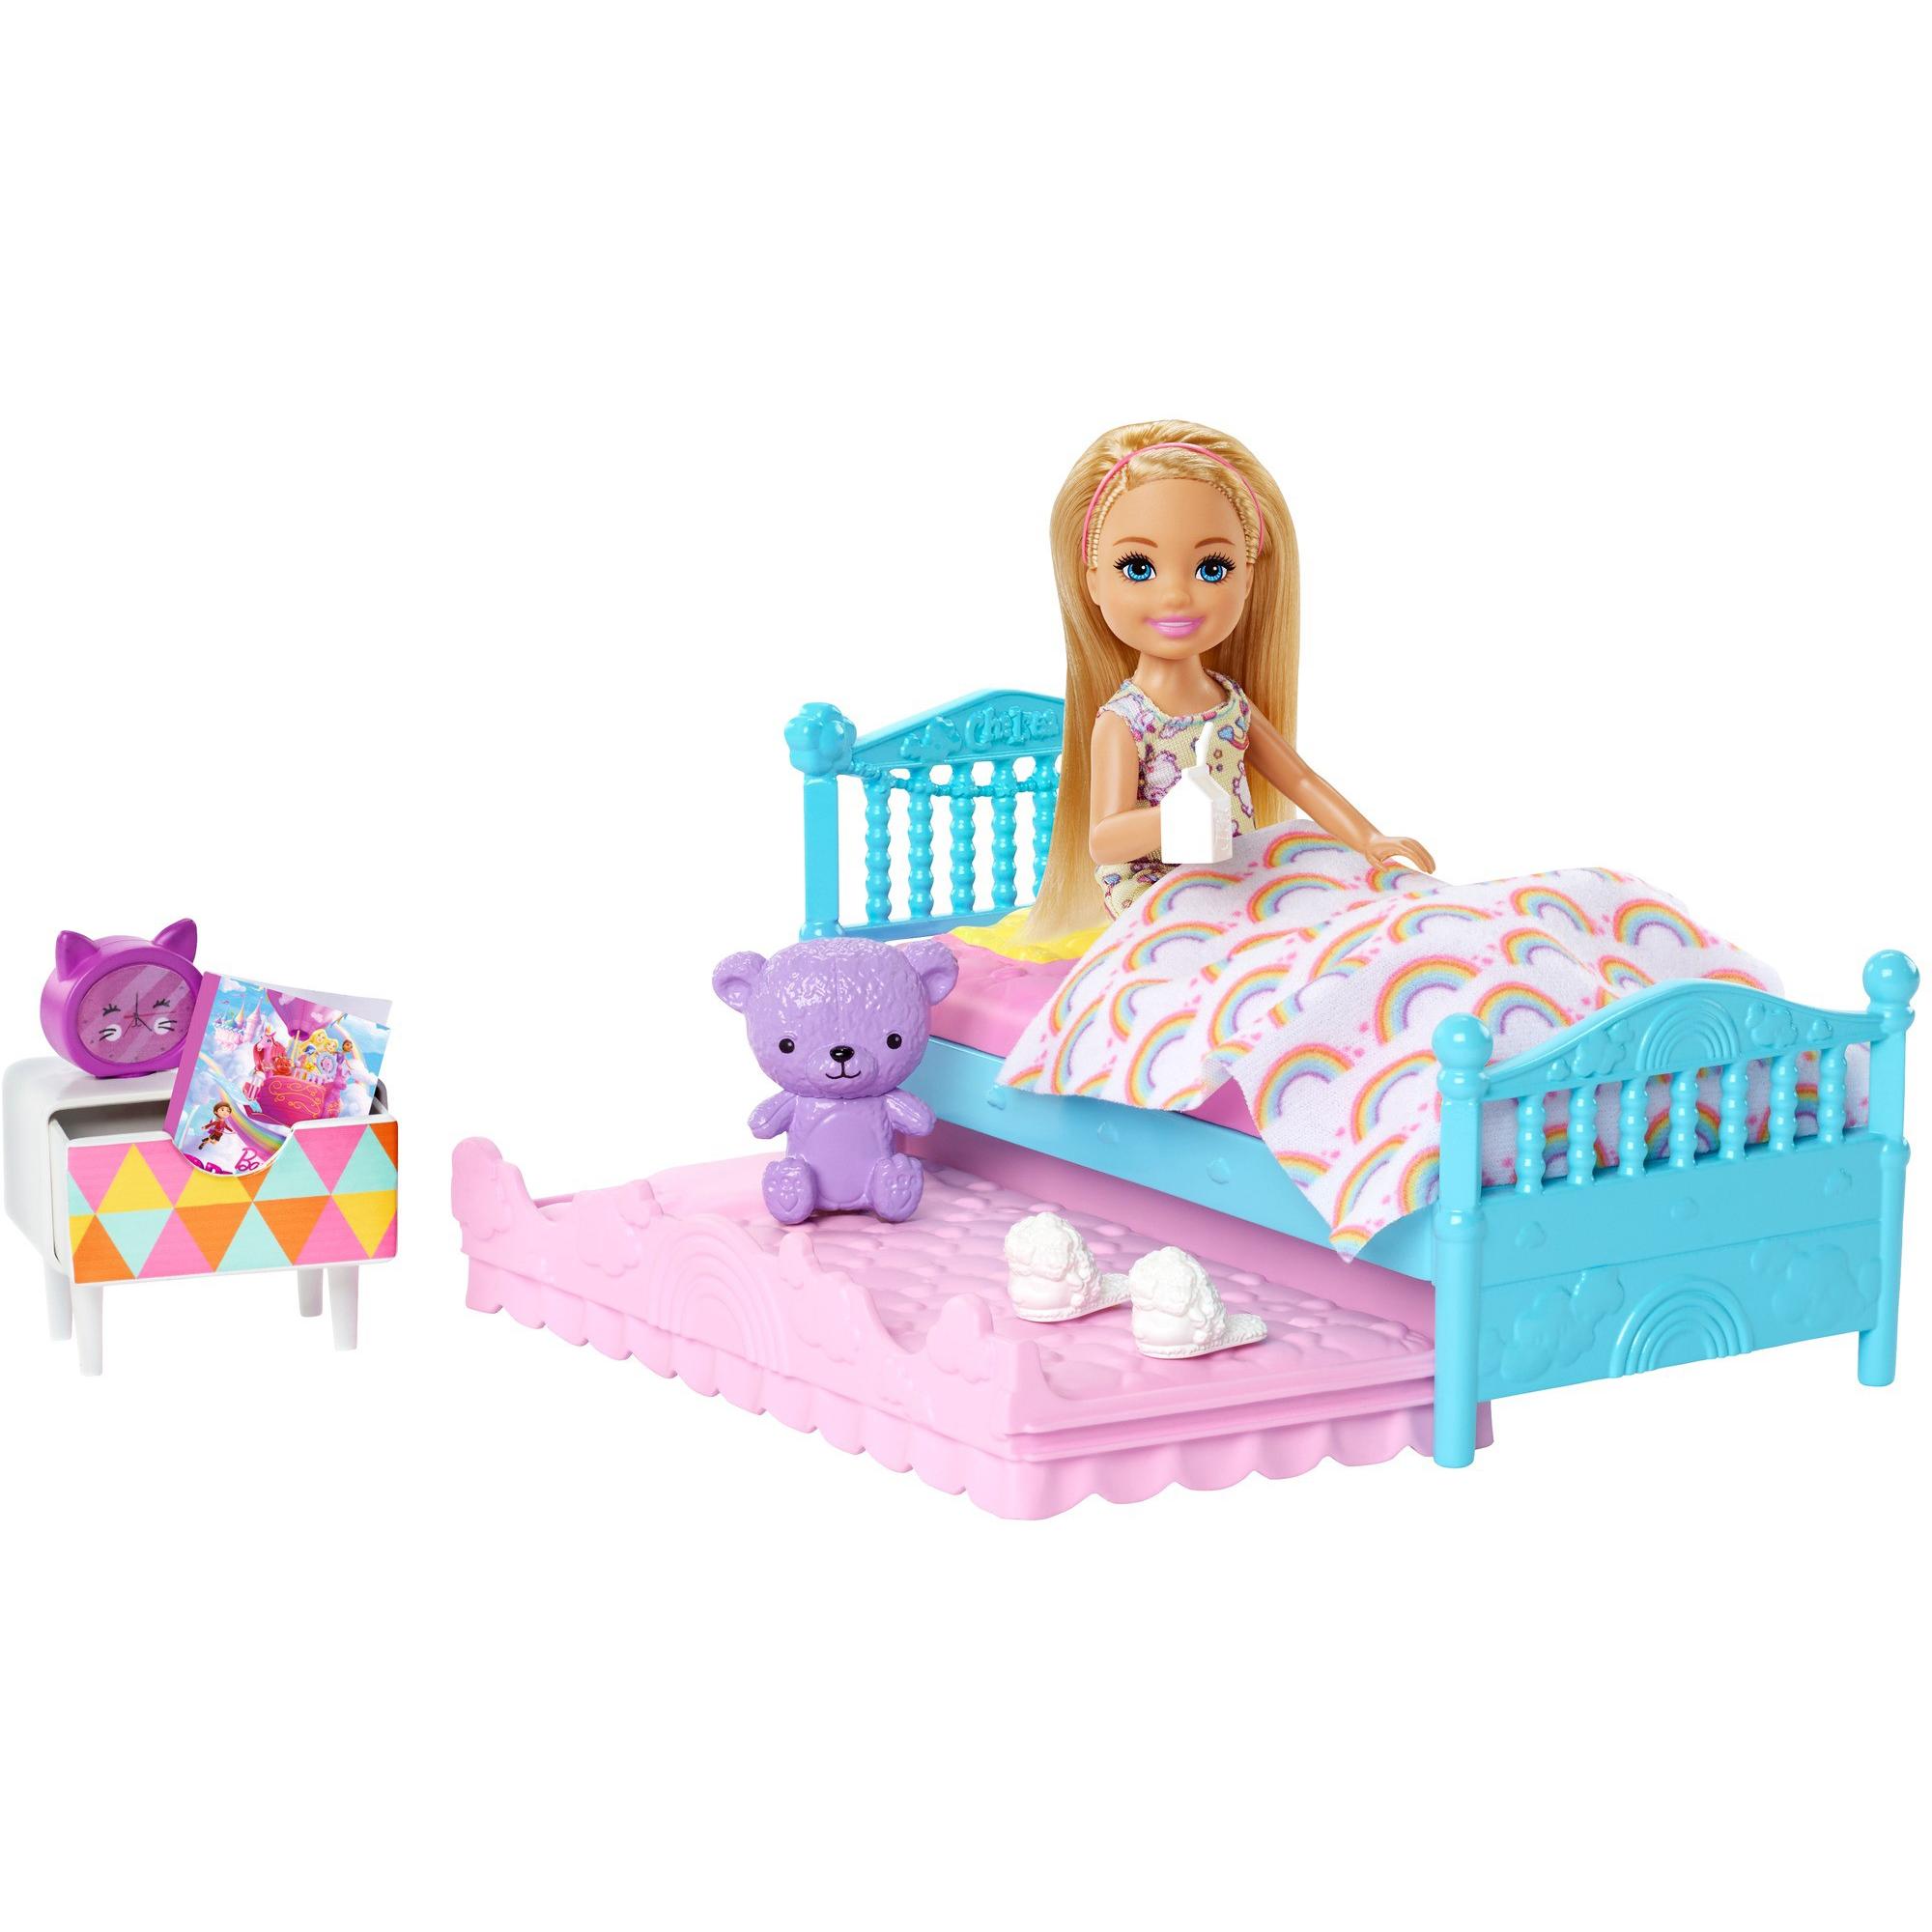 Barbie Club Chelsea Bedtime Doll and Bedroom Playset - image 3 of 8